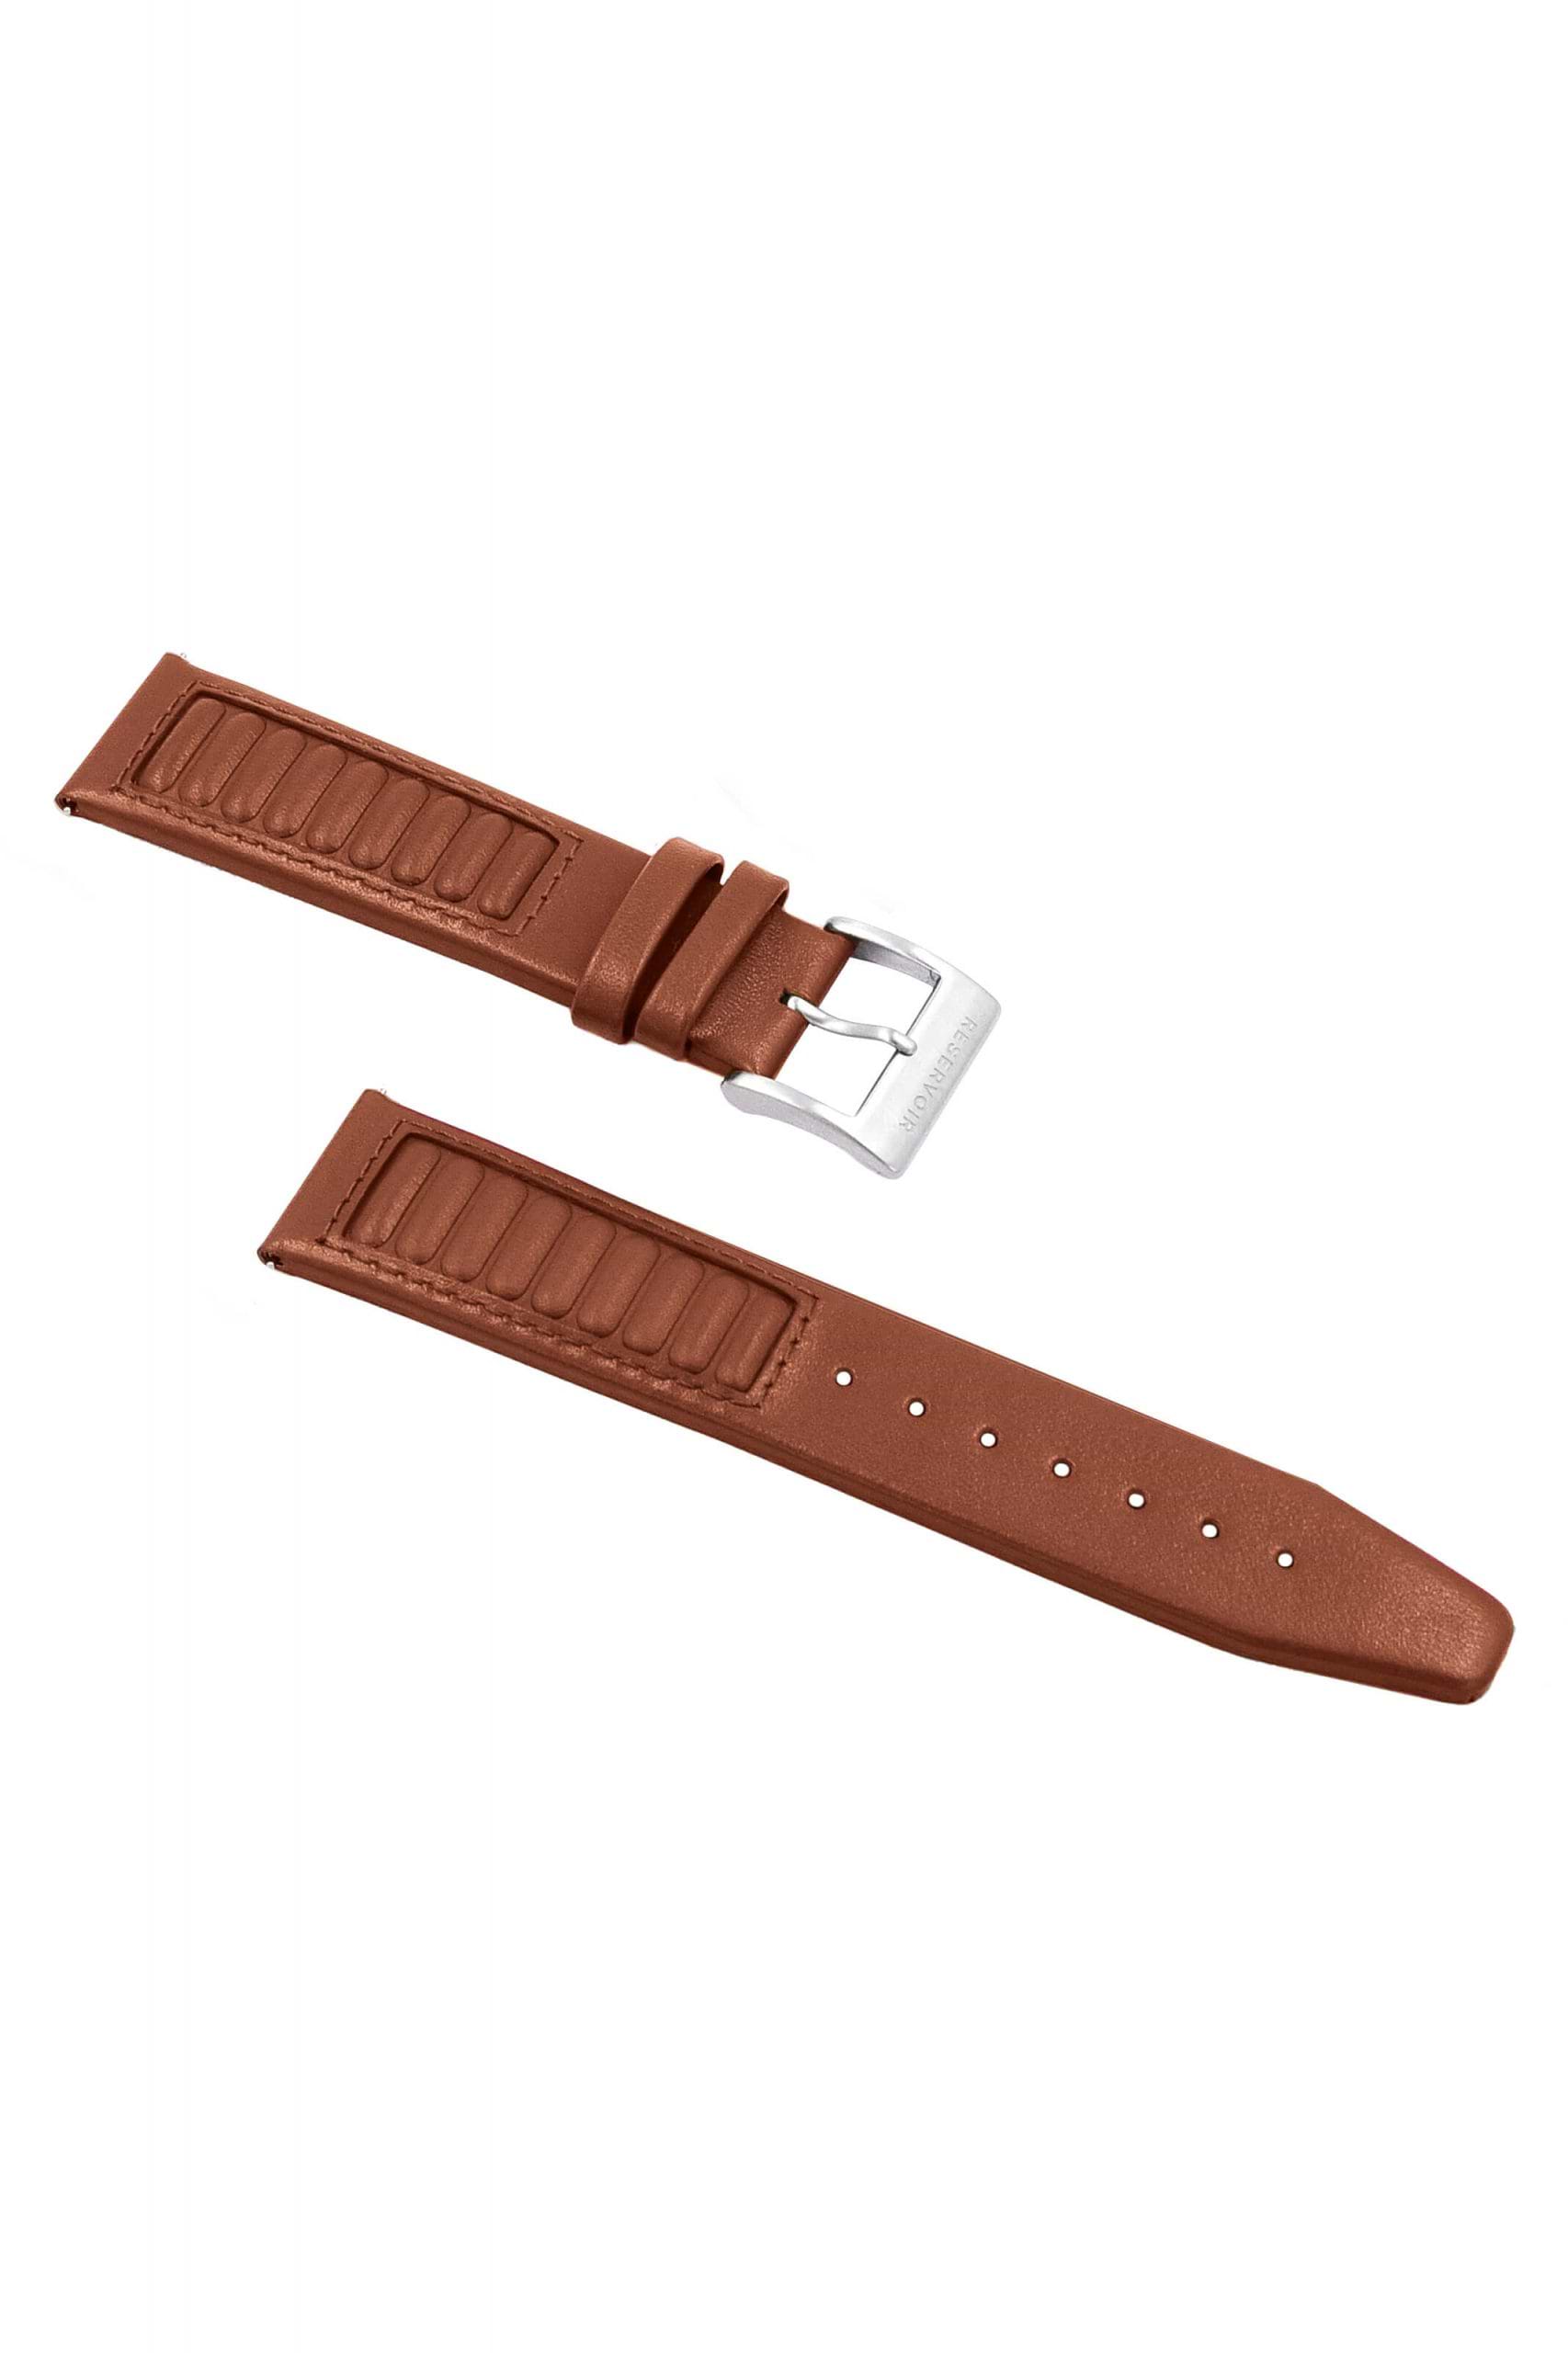 Dark Red 356 Porsche Leather Strap with Light Beige and Light Grey Accents